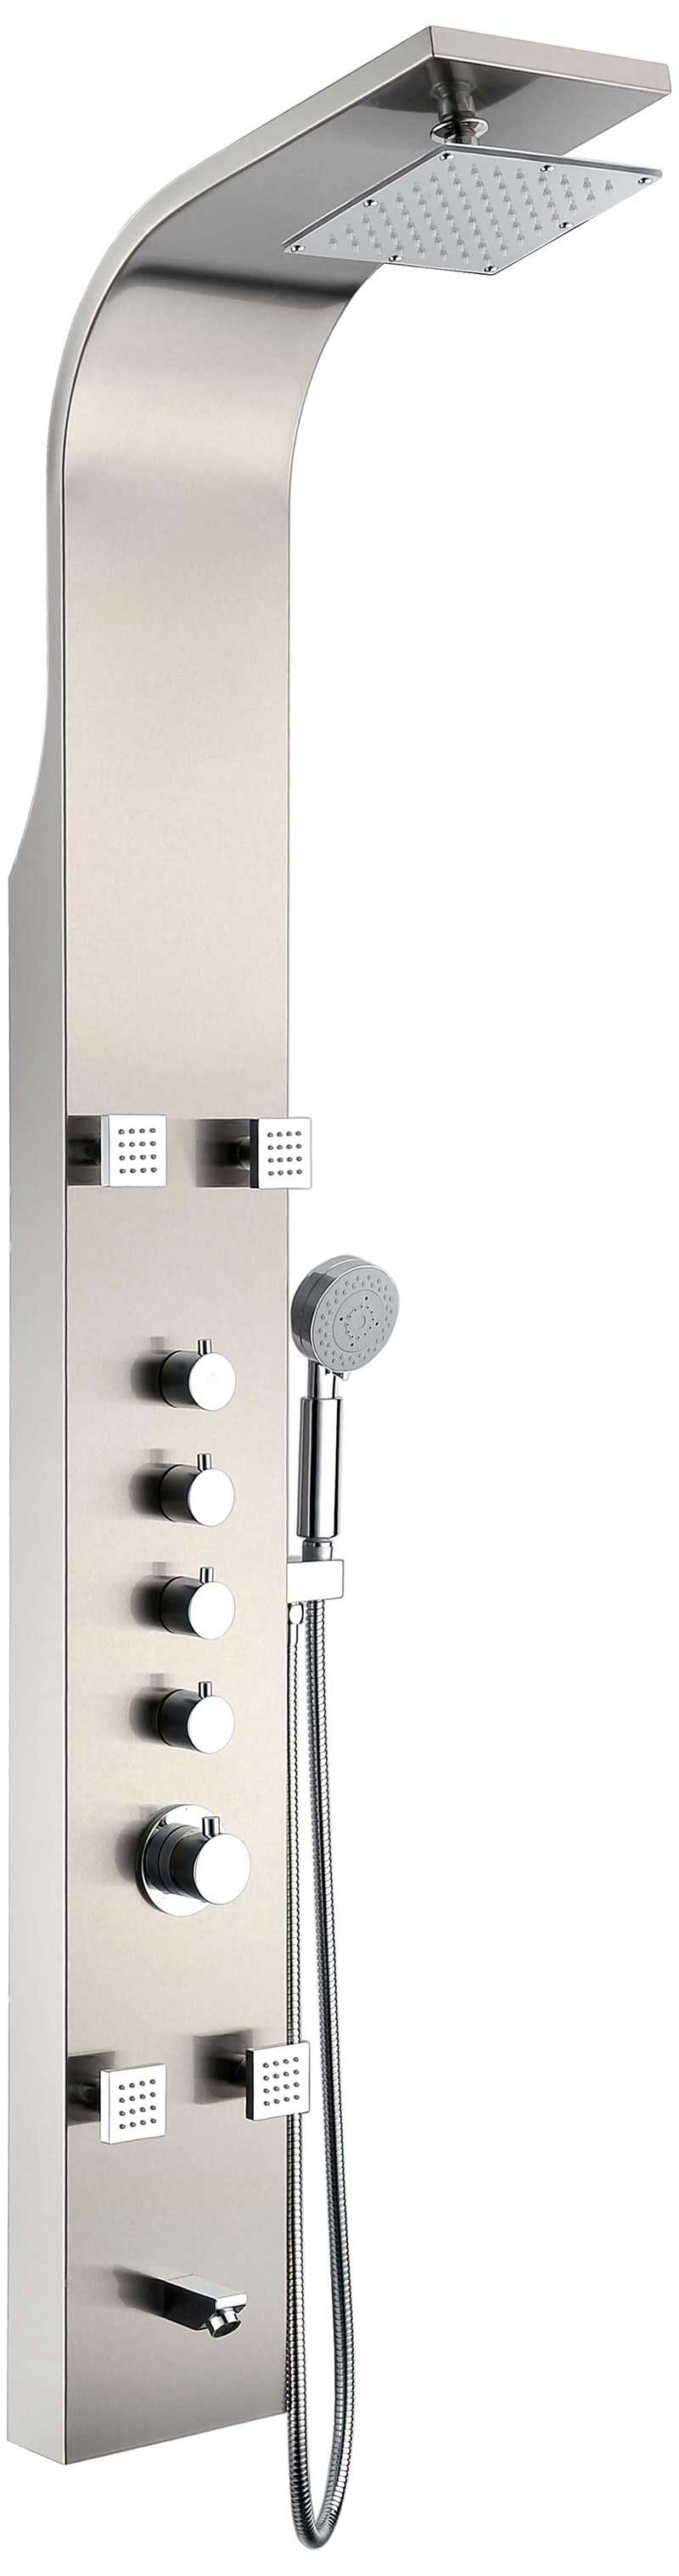 Anzzi Echo 63.5 in. 4-Jetted Full Body Shower Panel with Heavy Rain Shower and Spray Wand in Brushed Stainless Steel